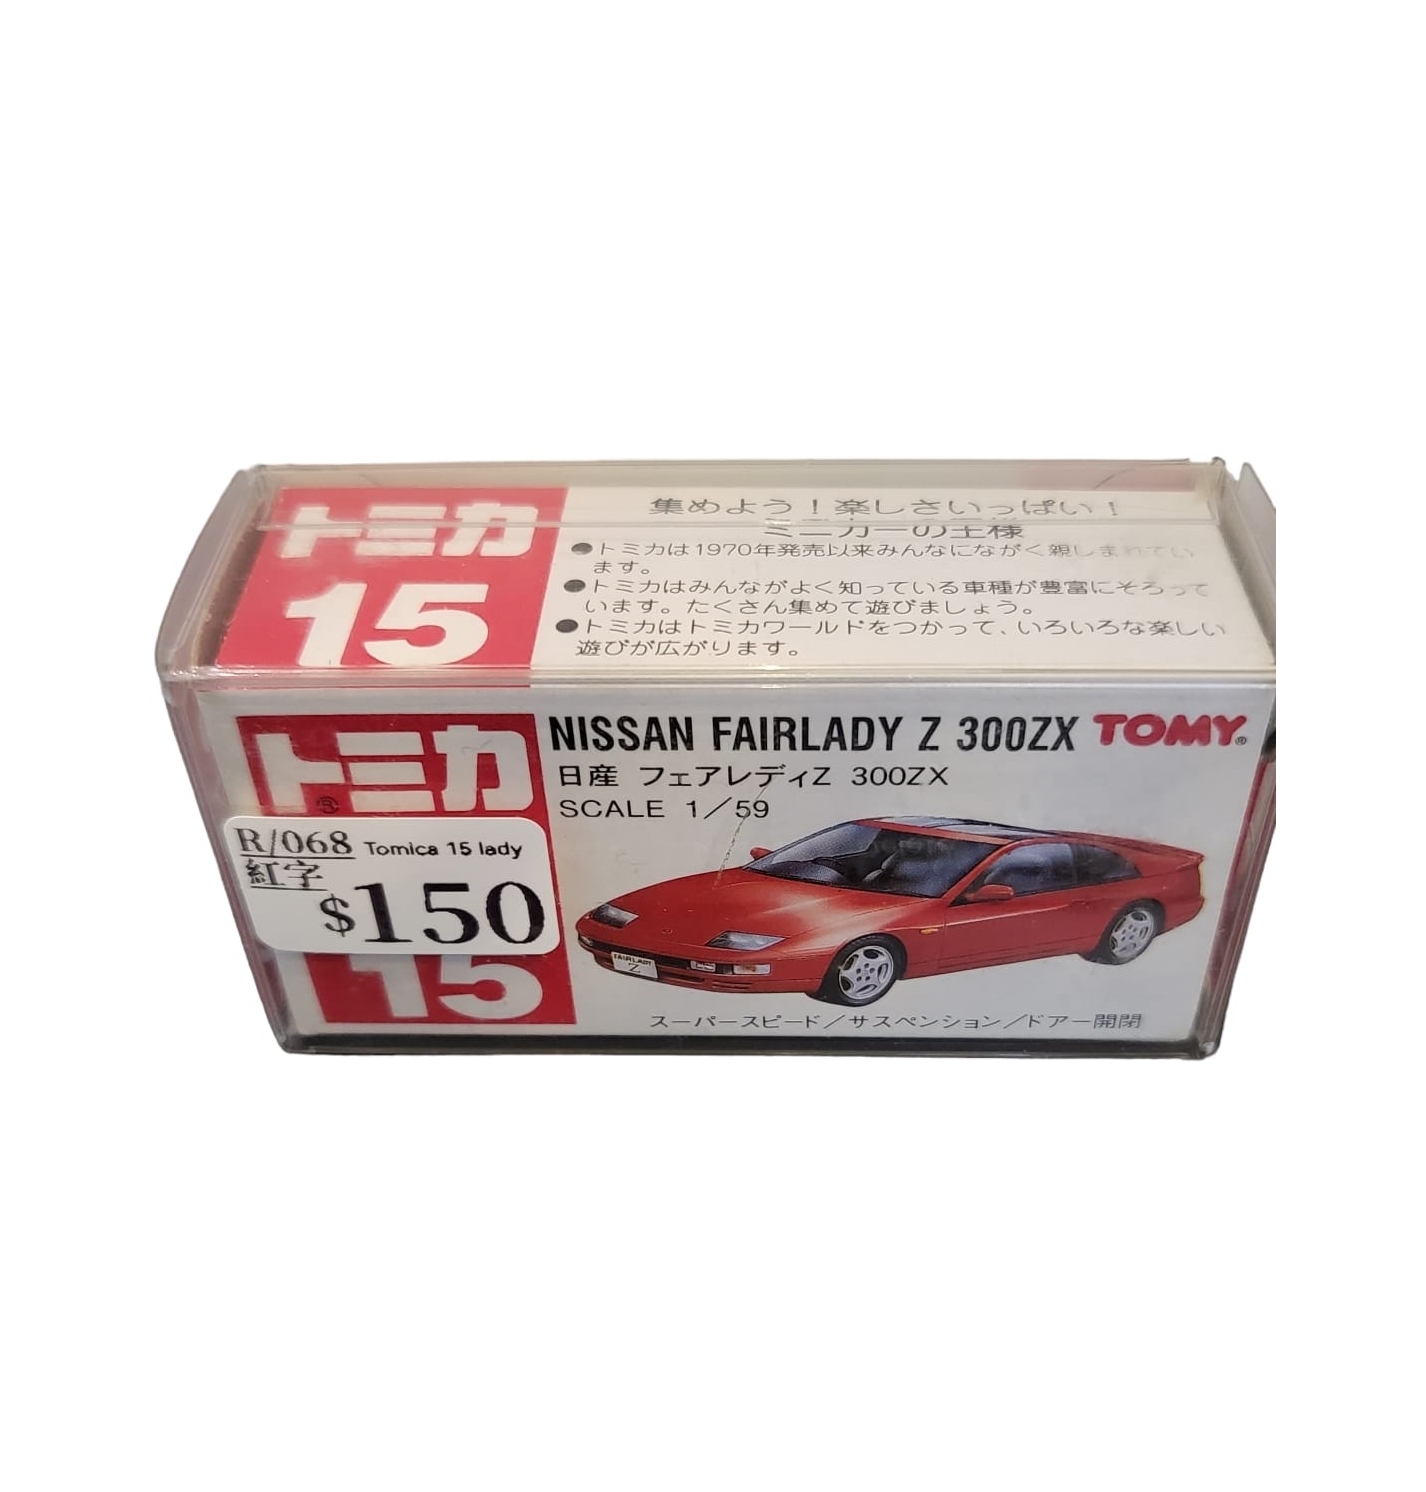 RR寄賣品( 中古品) Tomica 15 Nissan Fairlady Z 300ZX Made in